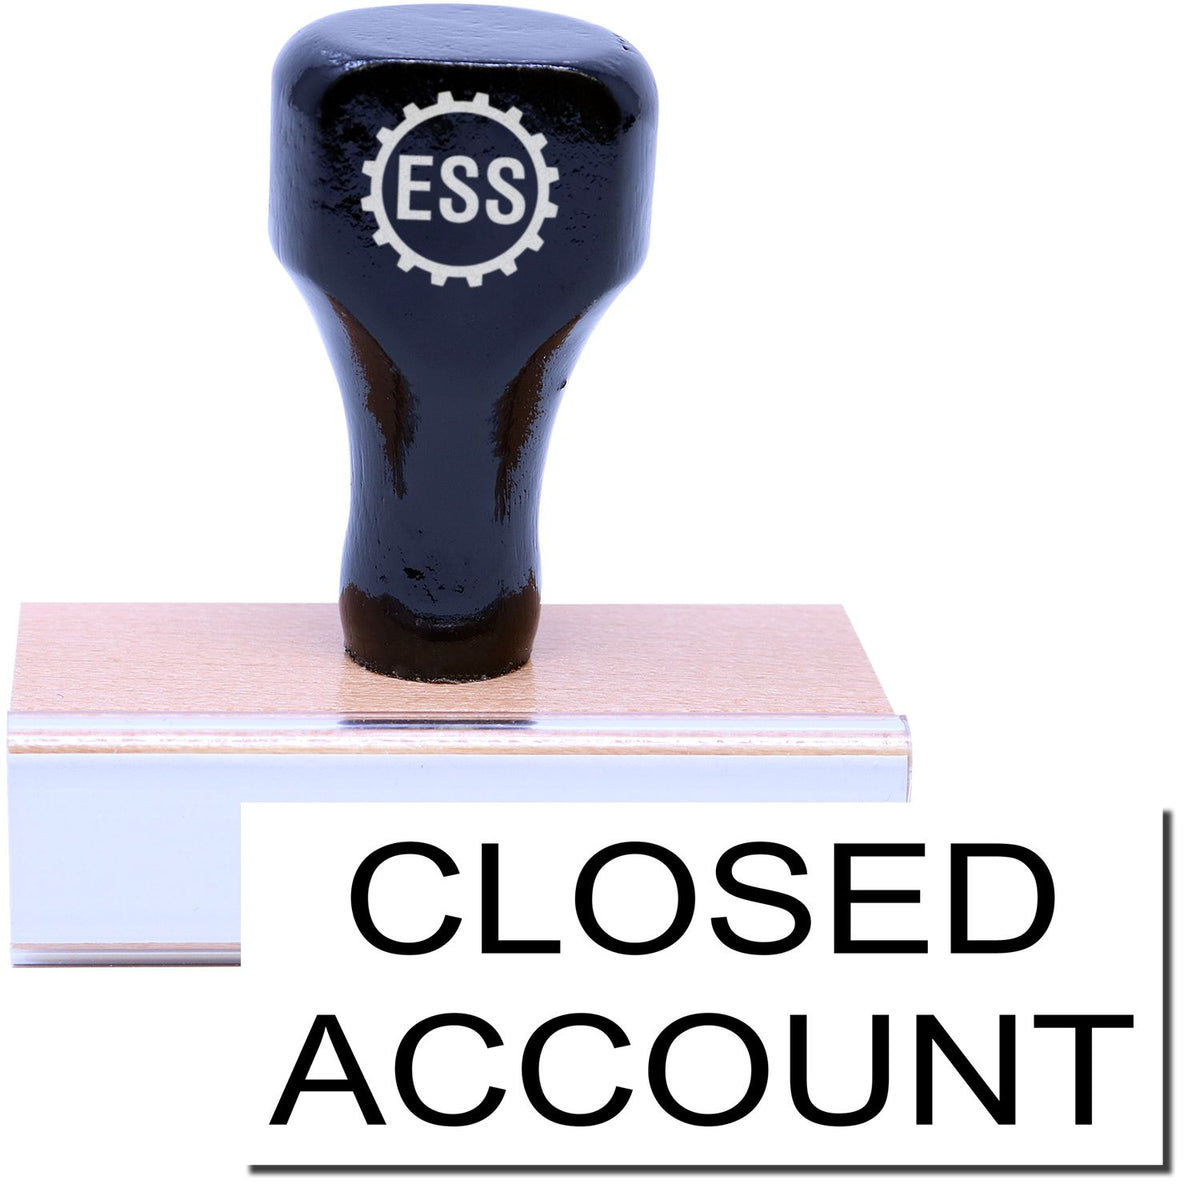 A stock office rubber stamp with a stamped image showing how the text &quot;CLOSED ACCOUNT&quot; is displayed after stamping.